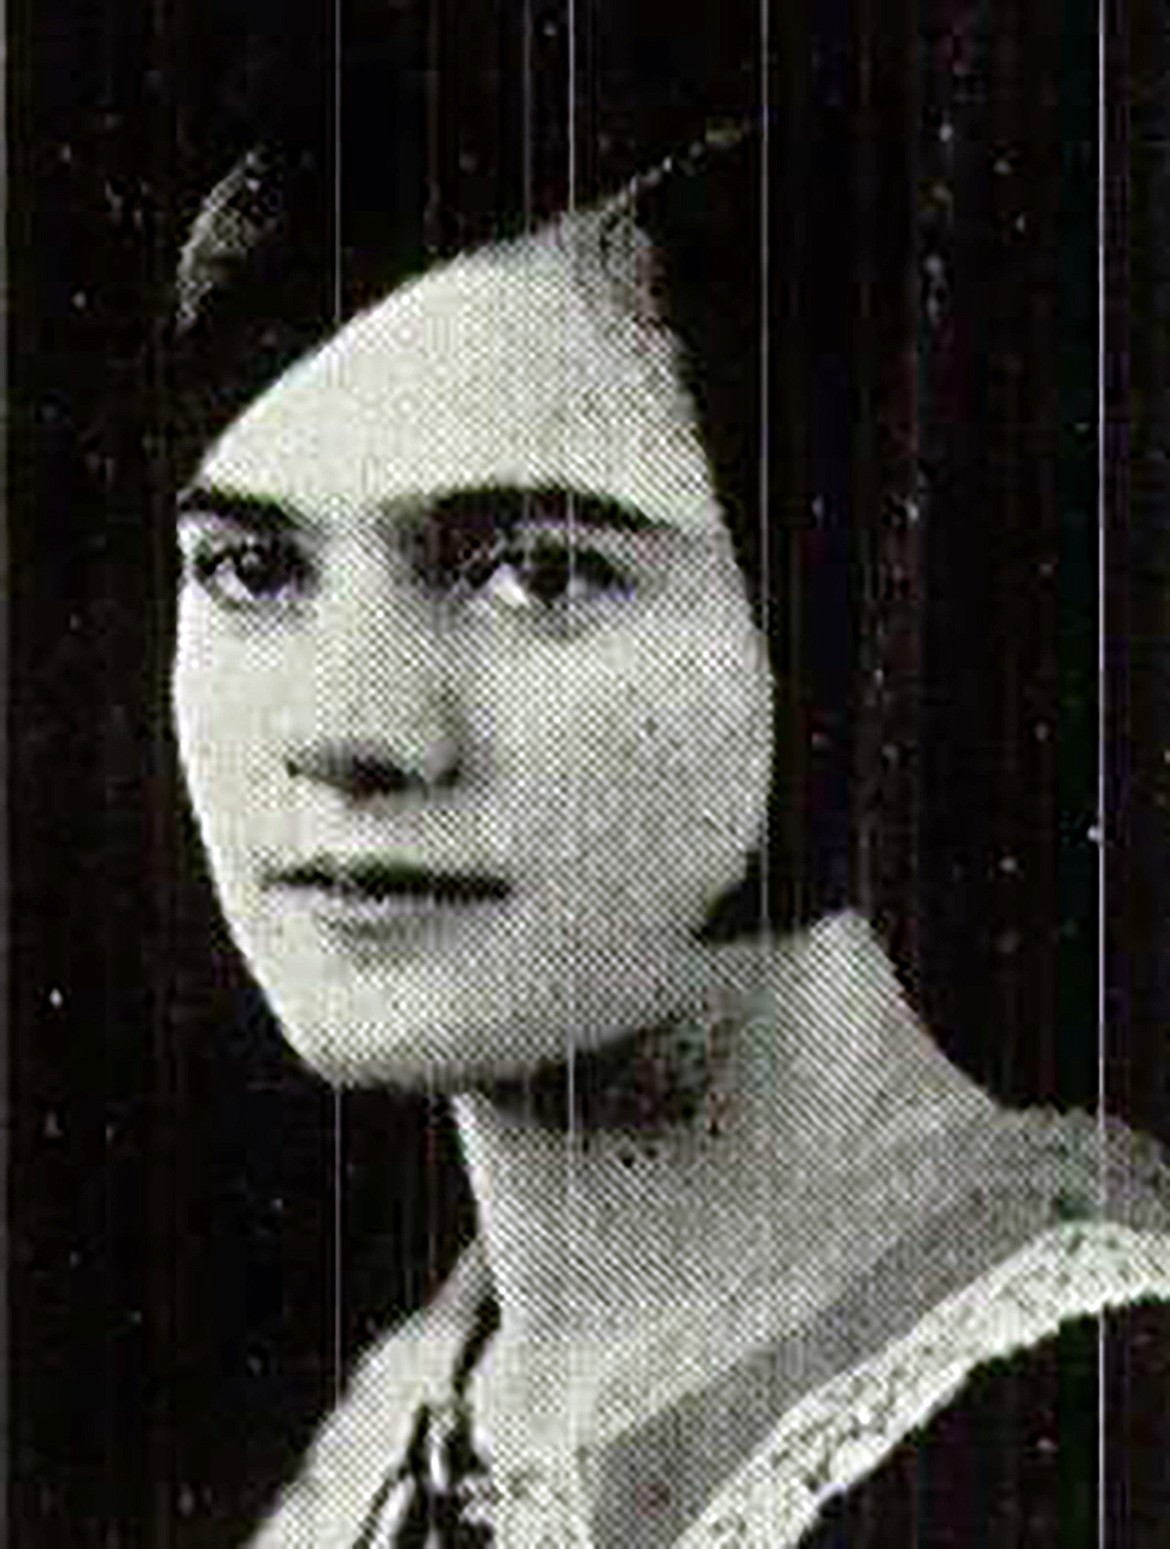 A yearbook photo of Mildred (Allison) Hubertz found on Ancestry.com shows her as a high school senior in Witchita, Kans., in 1927.